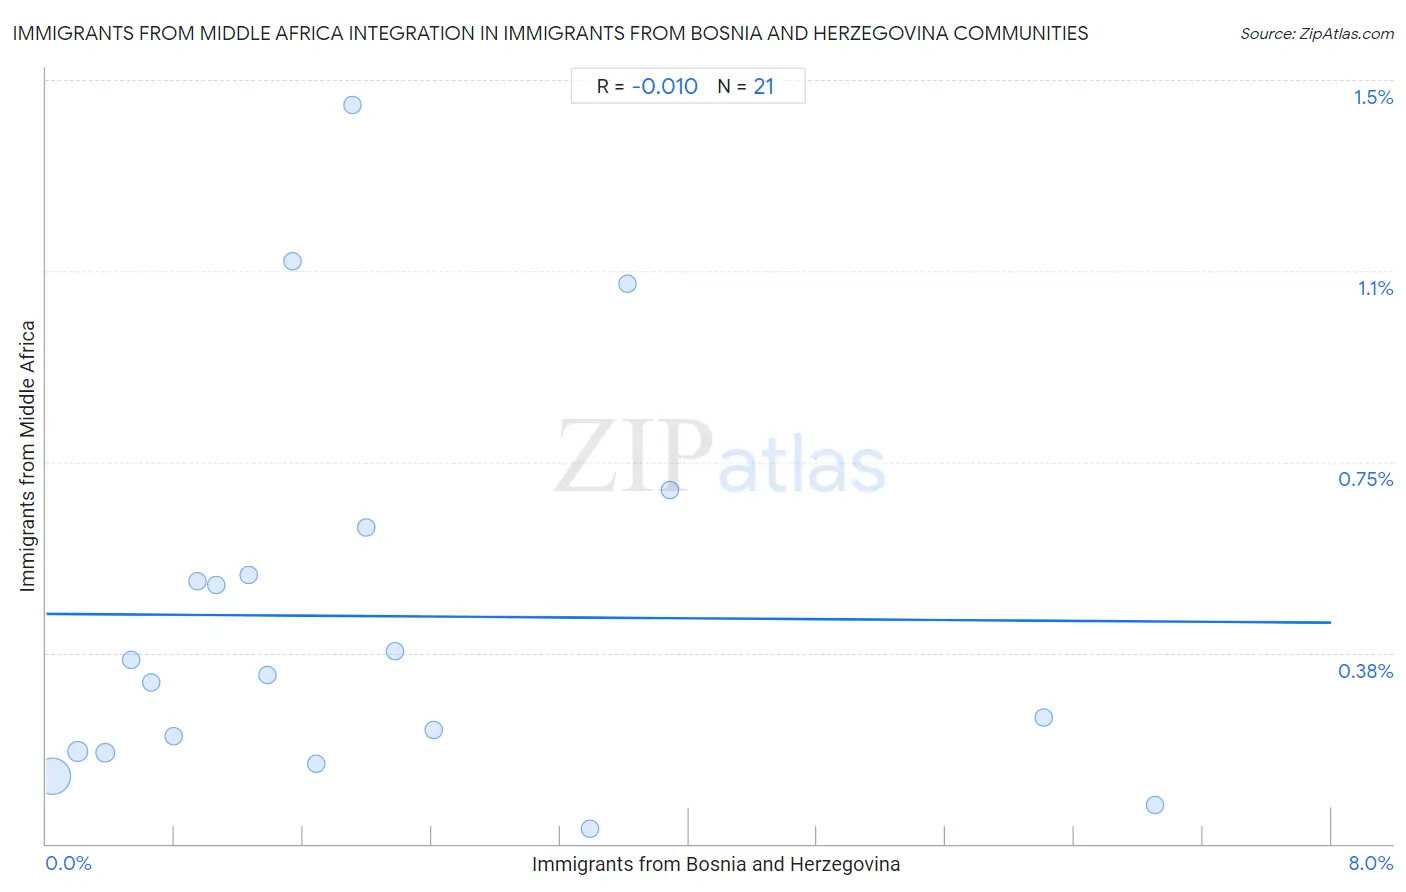 Immigrants from Bosnia and Herzegovina Integration in Immigrants from Middle Africa Communities